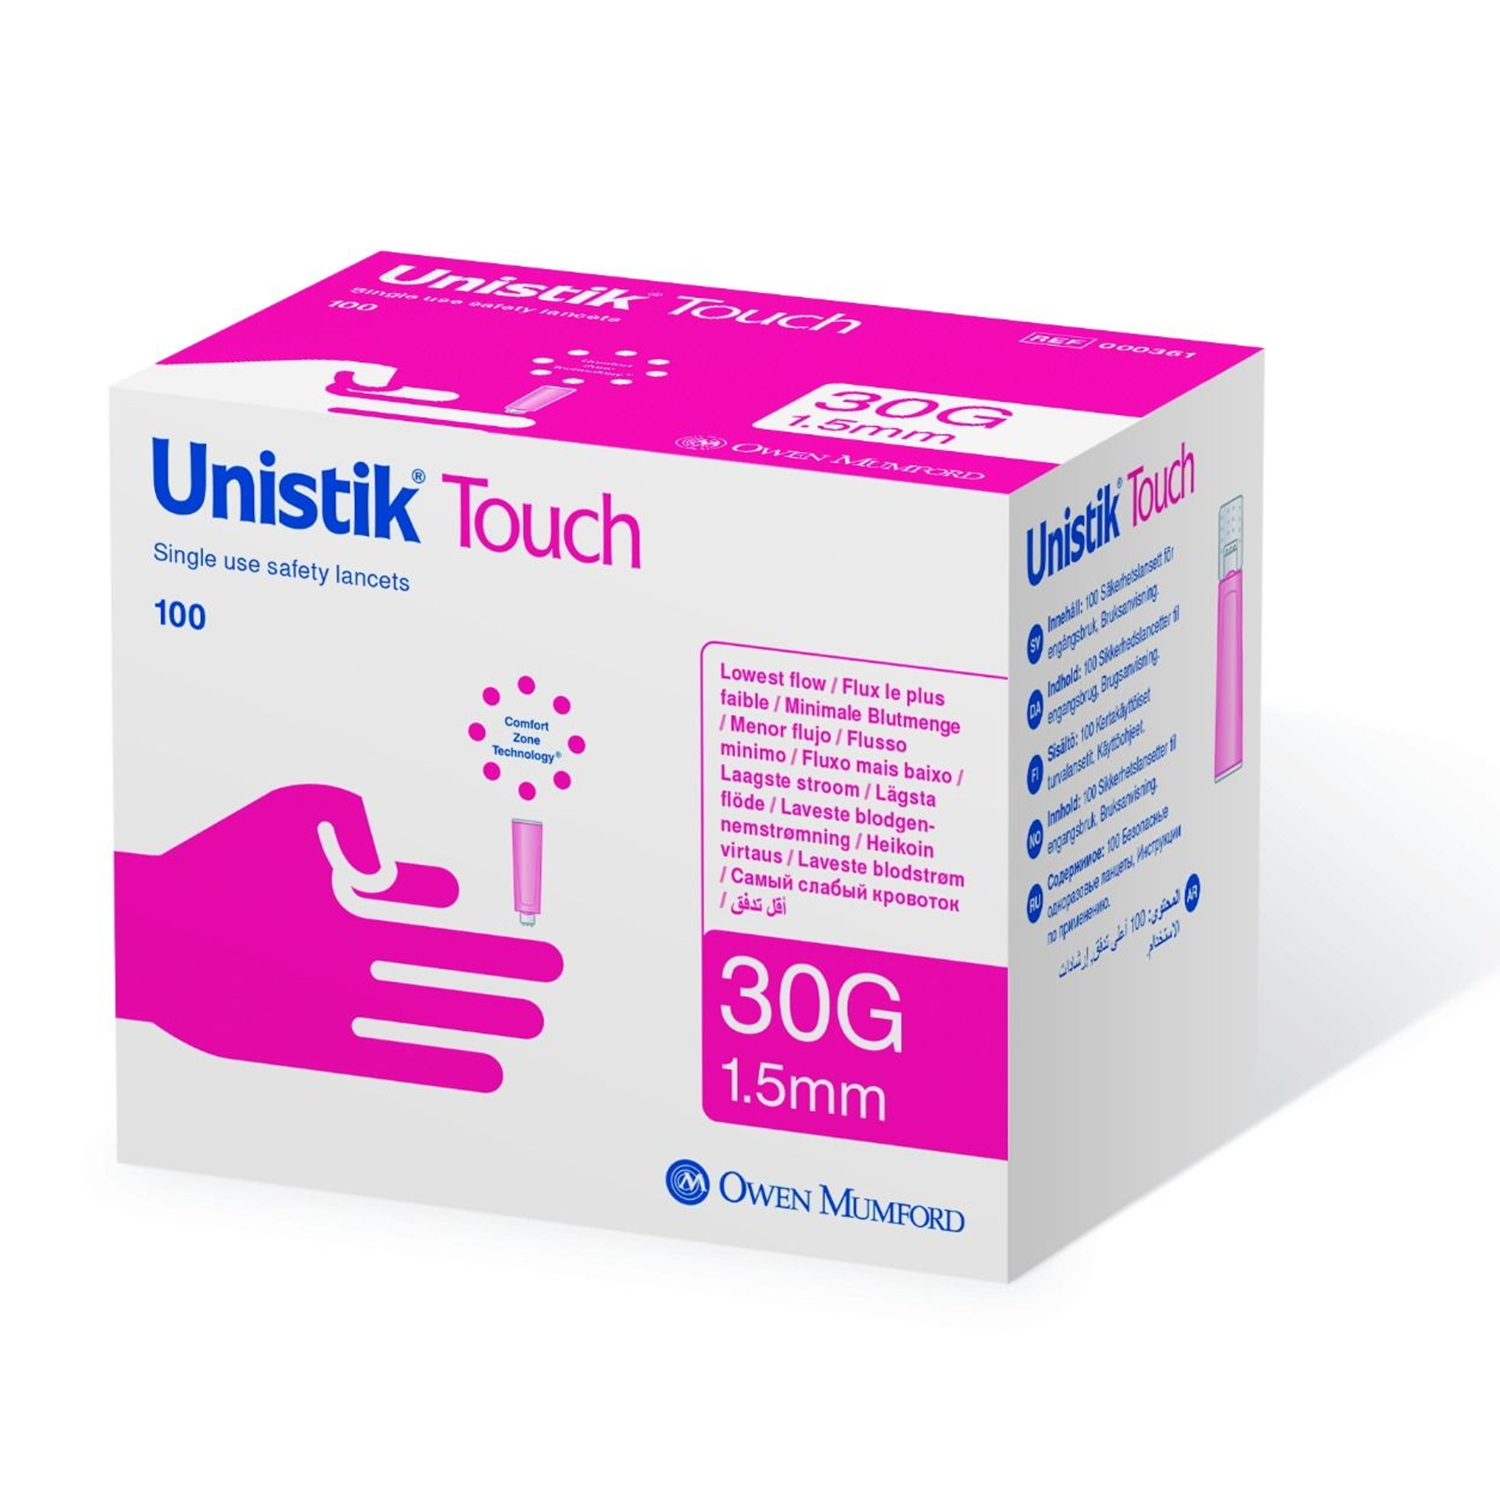 Unistik Touch Lancets | 30G | 1.5mm | Pink | Pack of 100